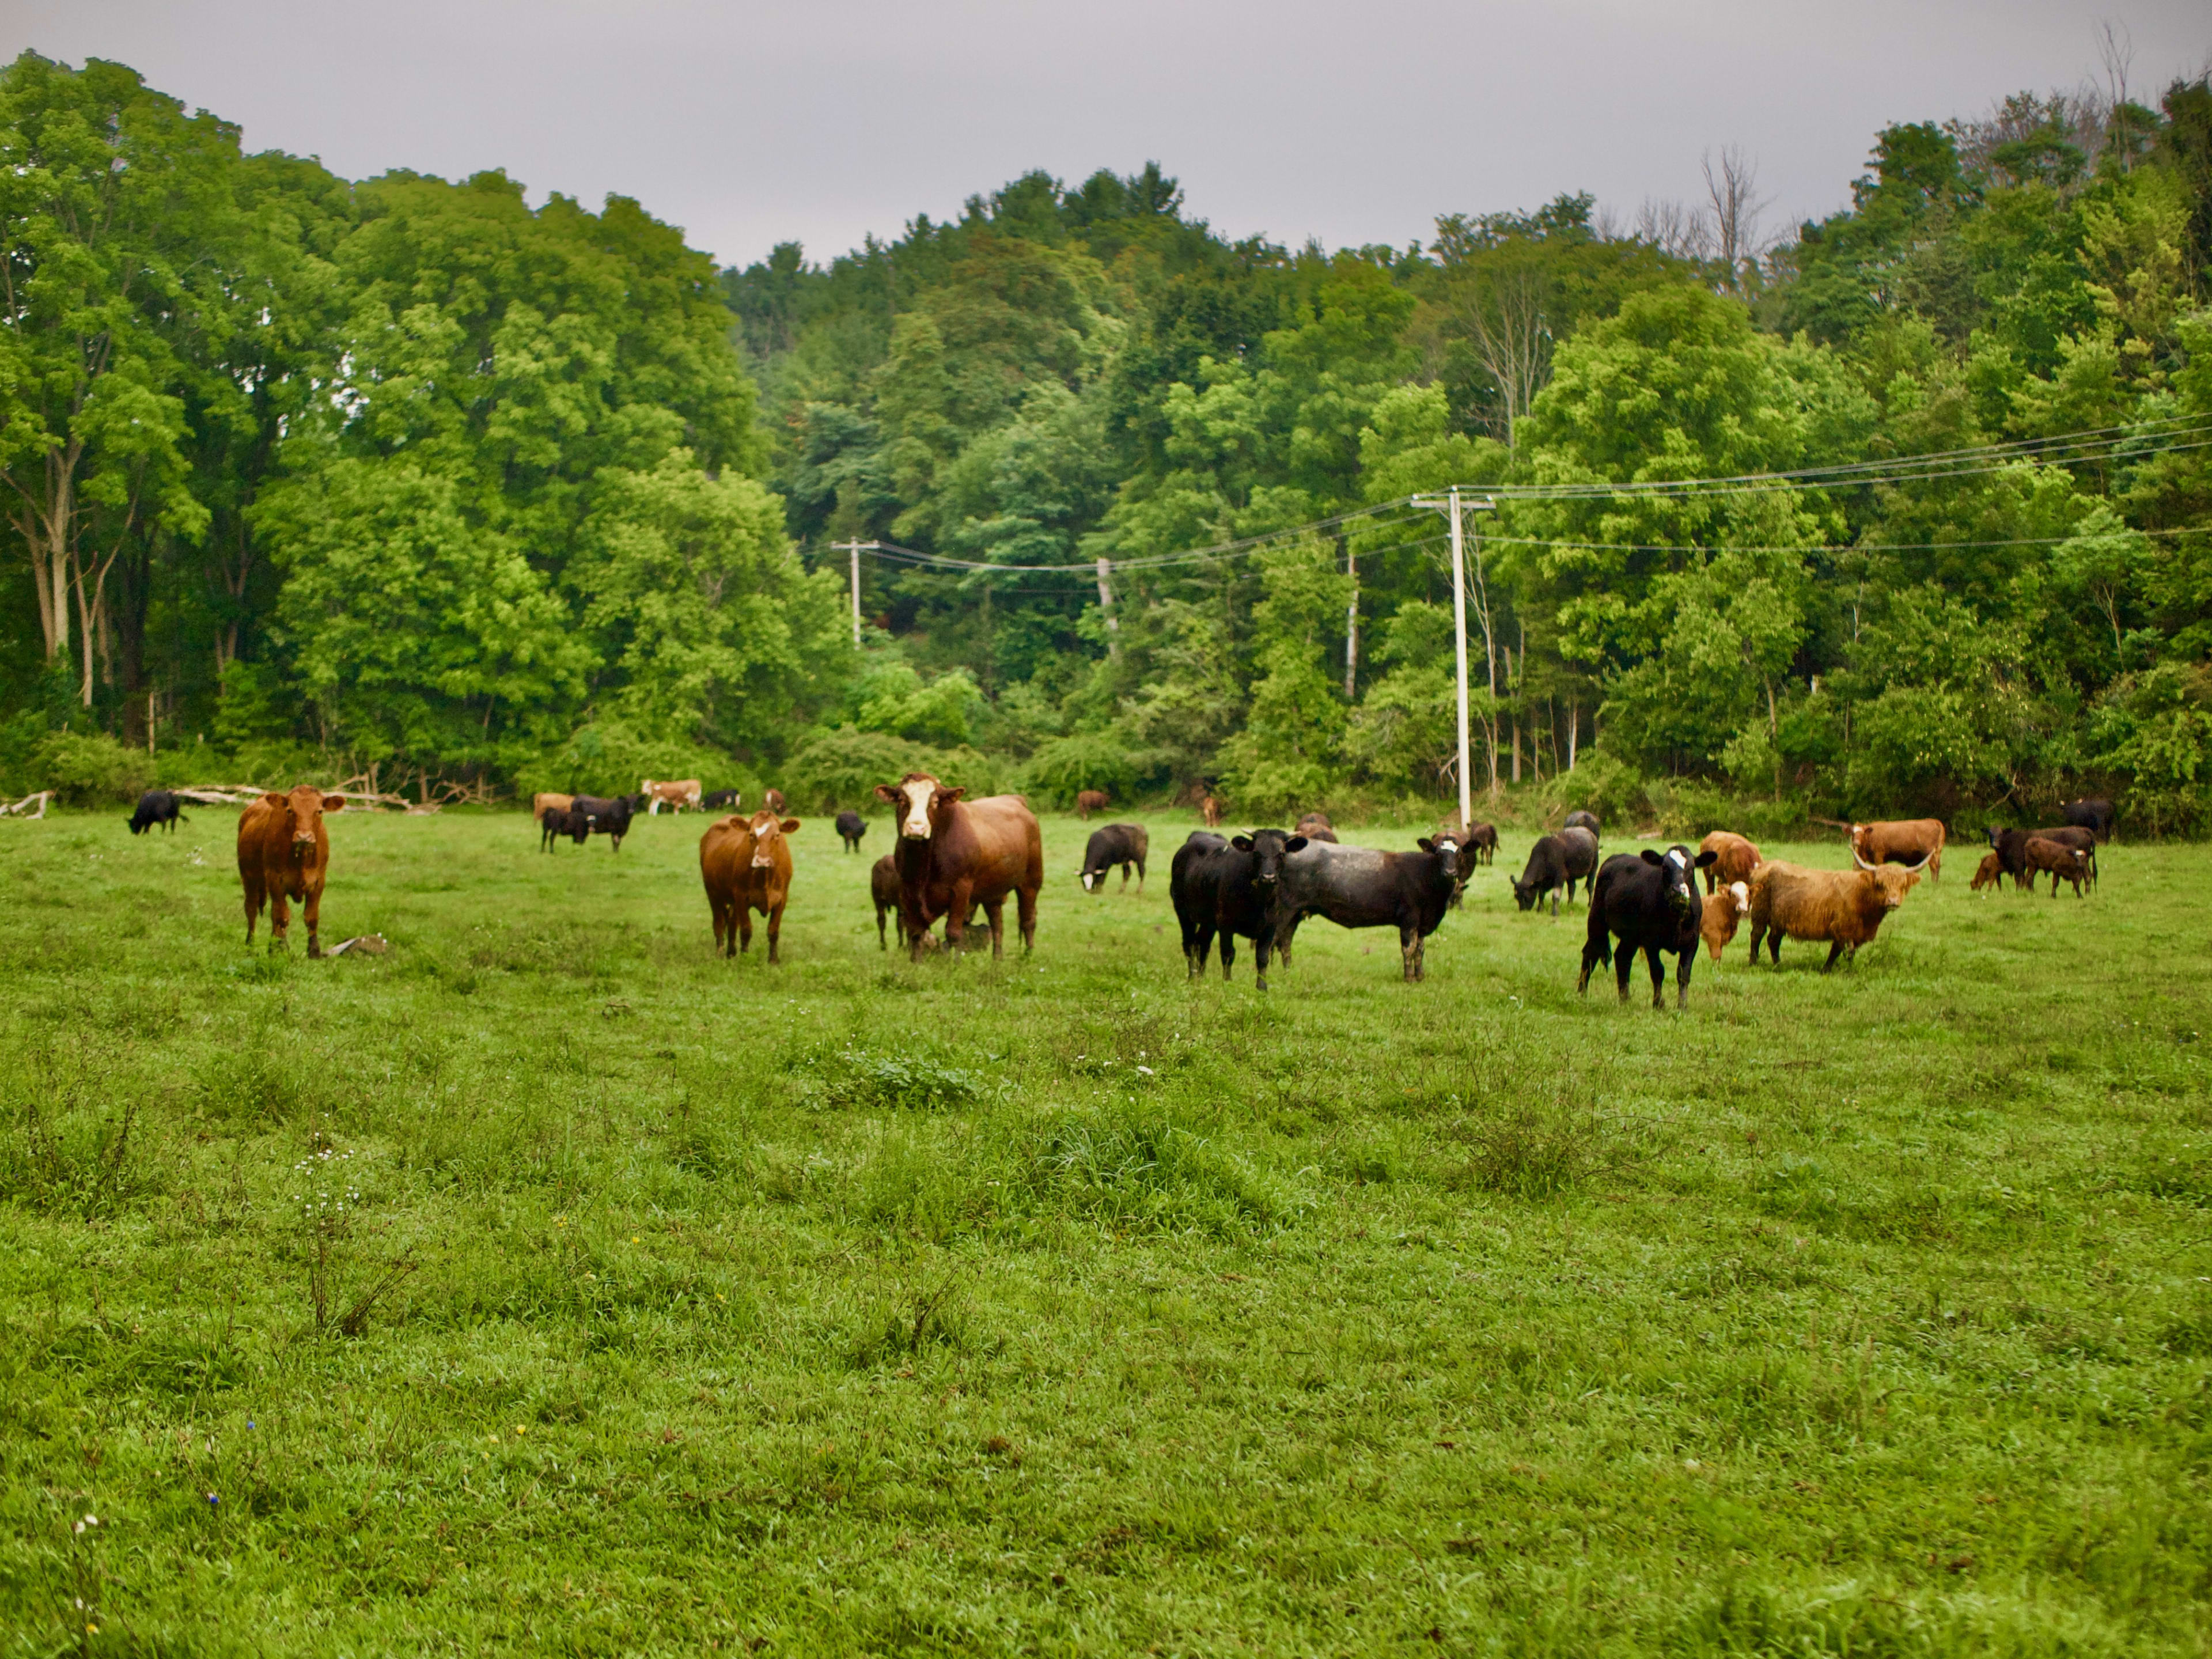 Grazing in the lower pasture